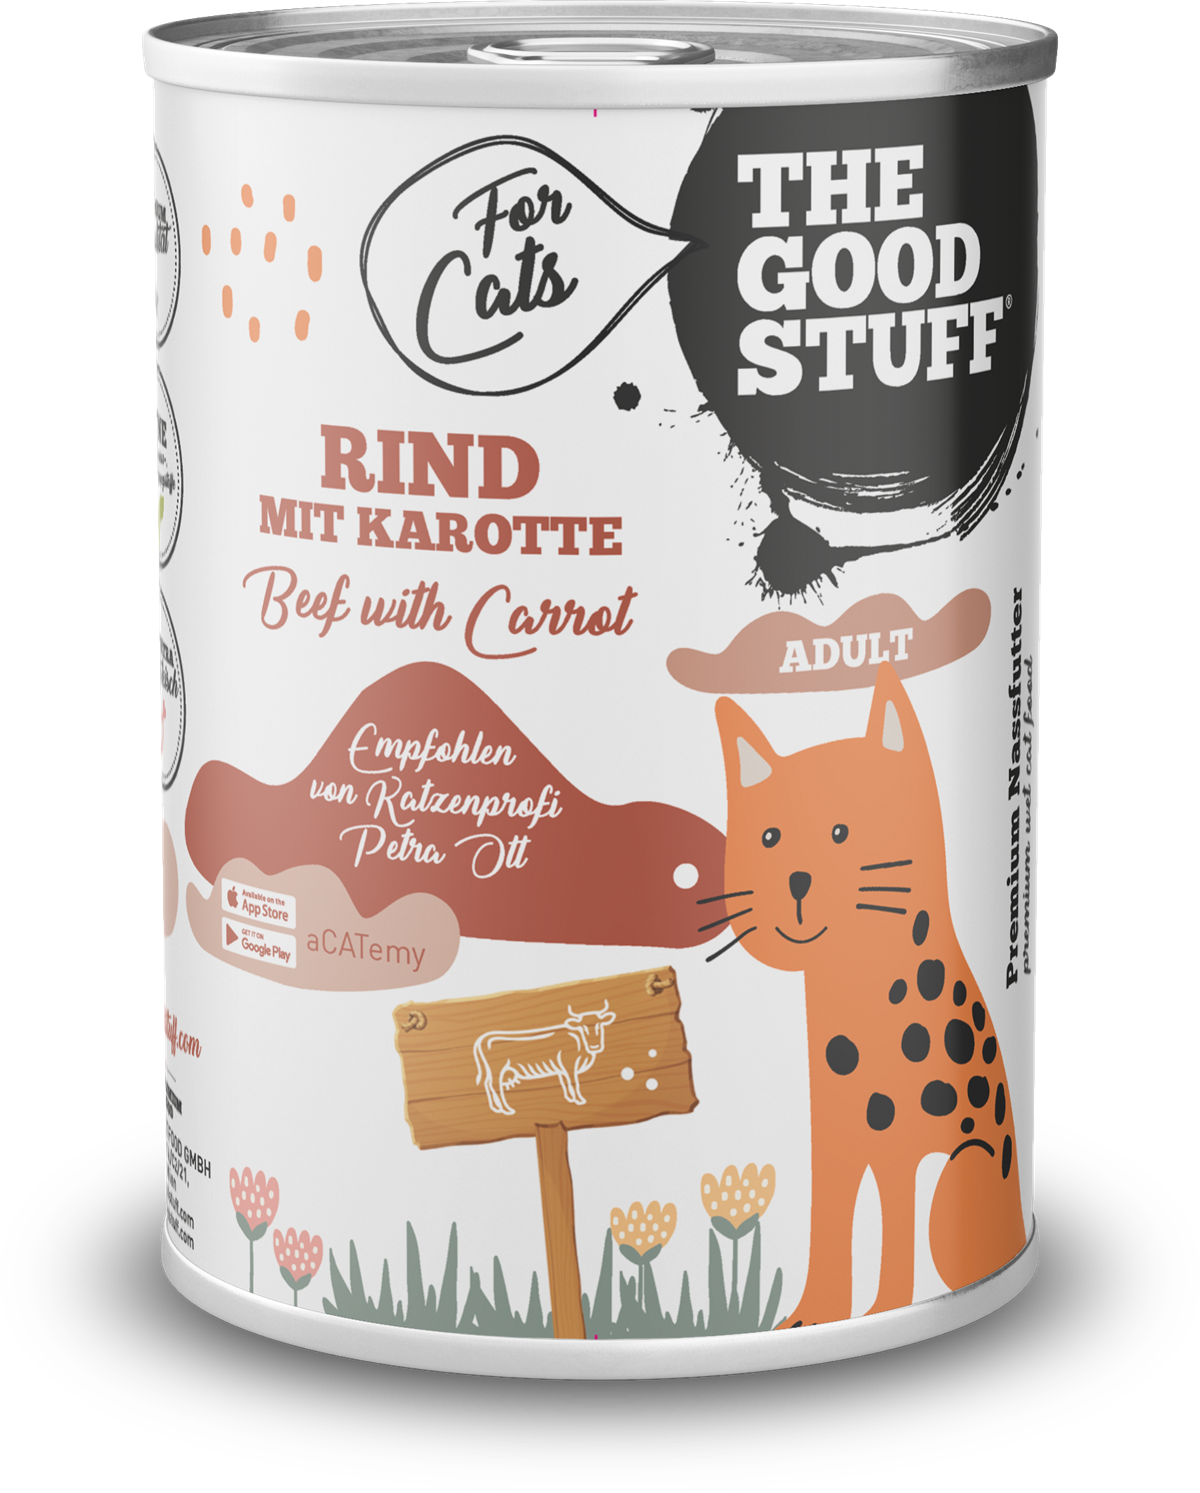 THE GOODSTUFF_For Cats_Rind_400g_EUR 3,19